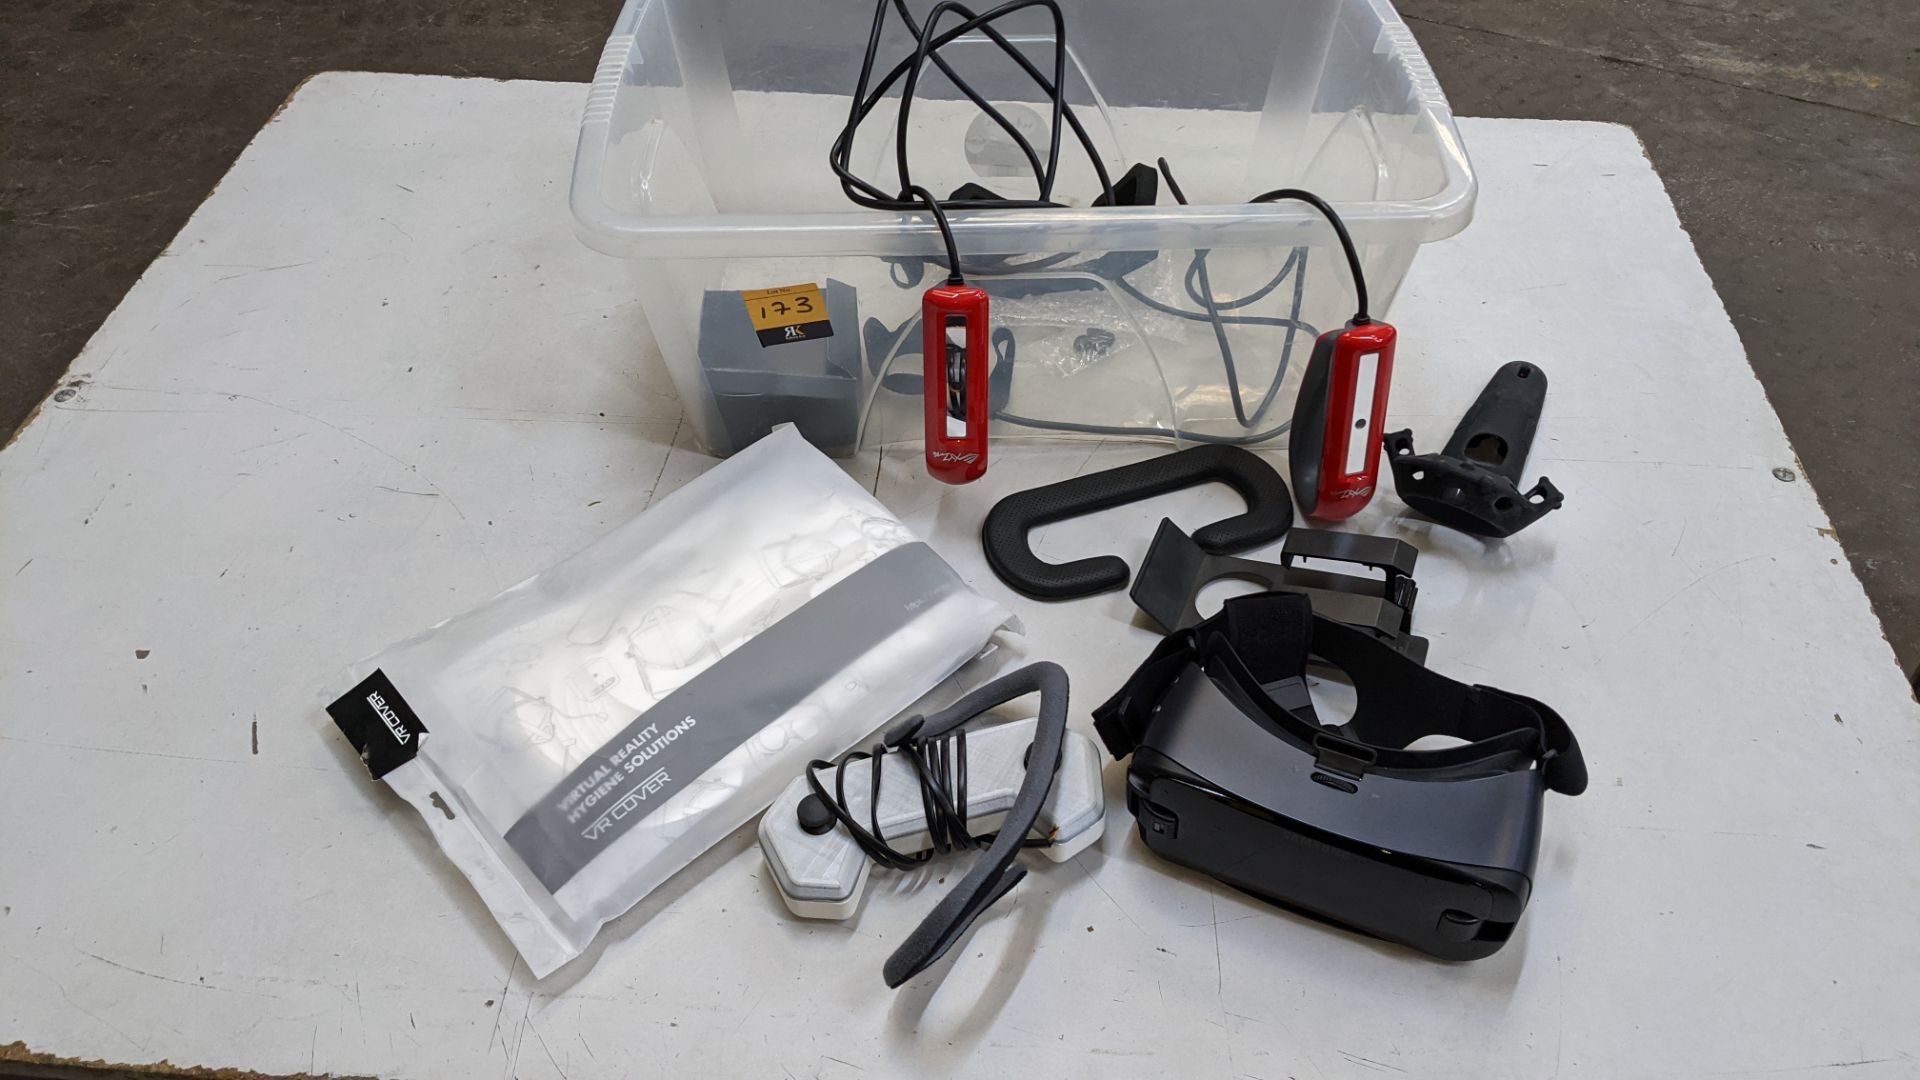 Contents of a crate of assorted virtual reality items including Samsung headset, assorted handles/co